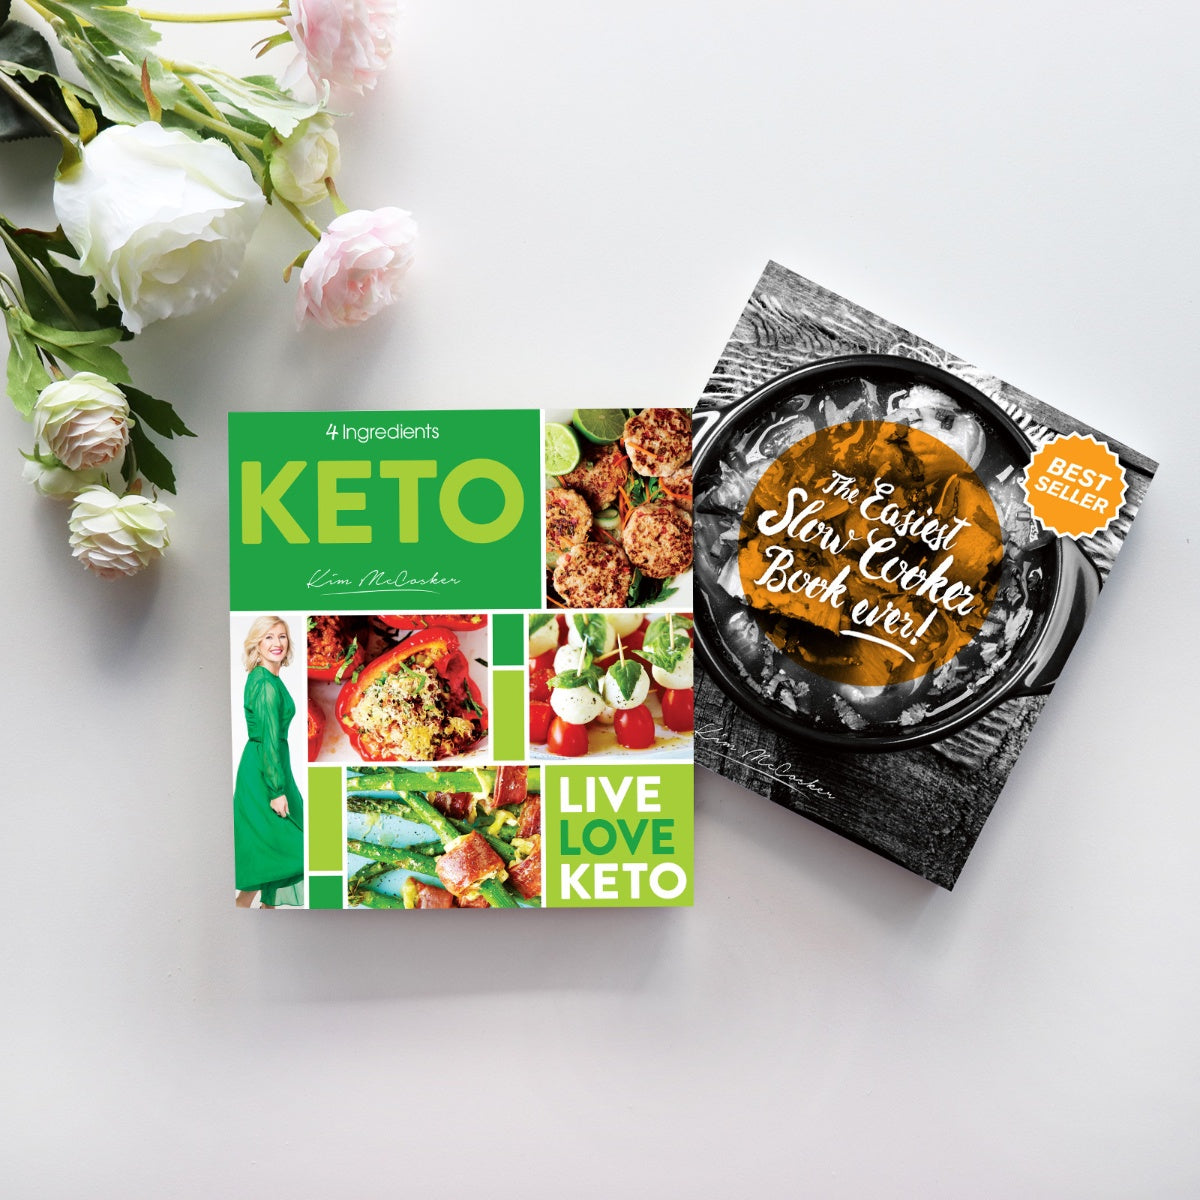 4 Ingredients Keto &amp; The Easiest Slow Cooker Book Ever!